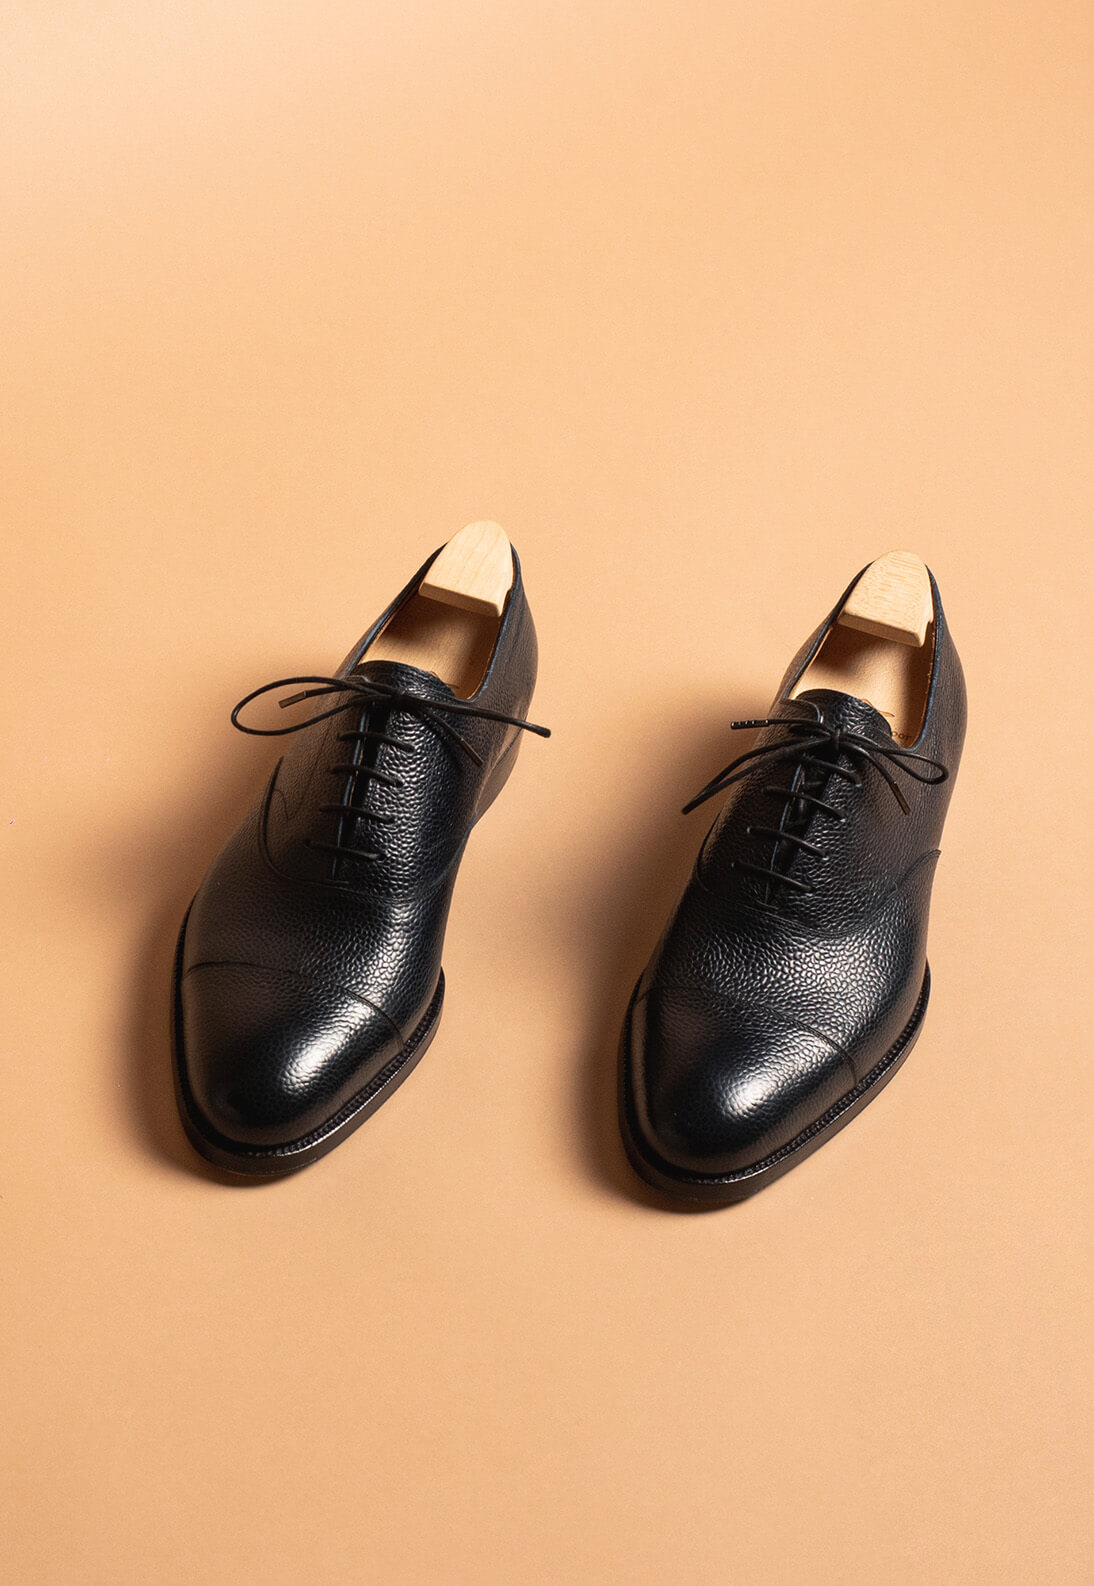 Tailor-made shoes for your style. Personalize your look with comfortable and elegant bespoke footwear shoes